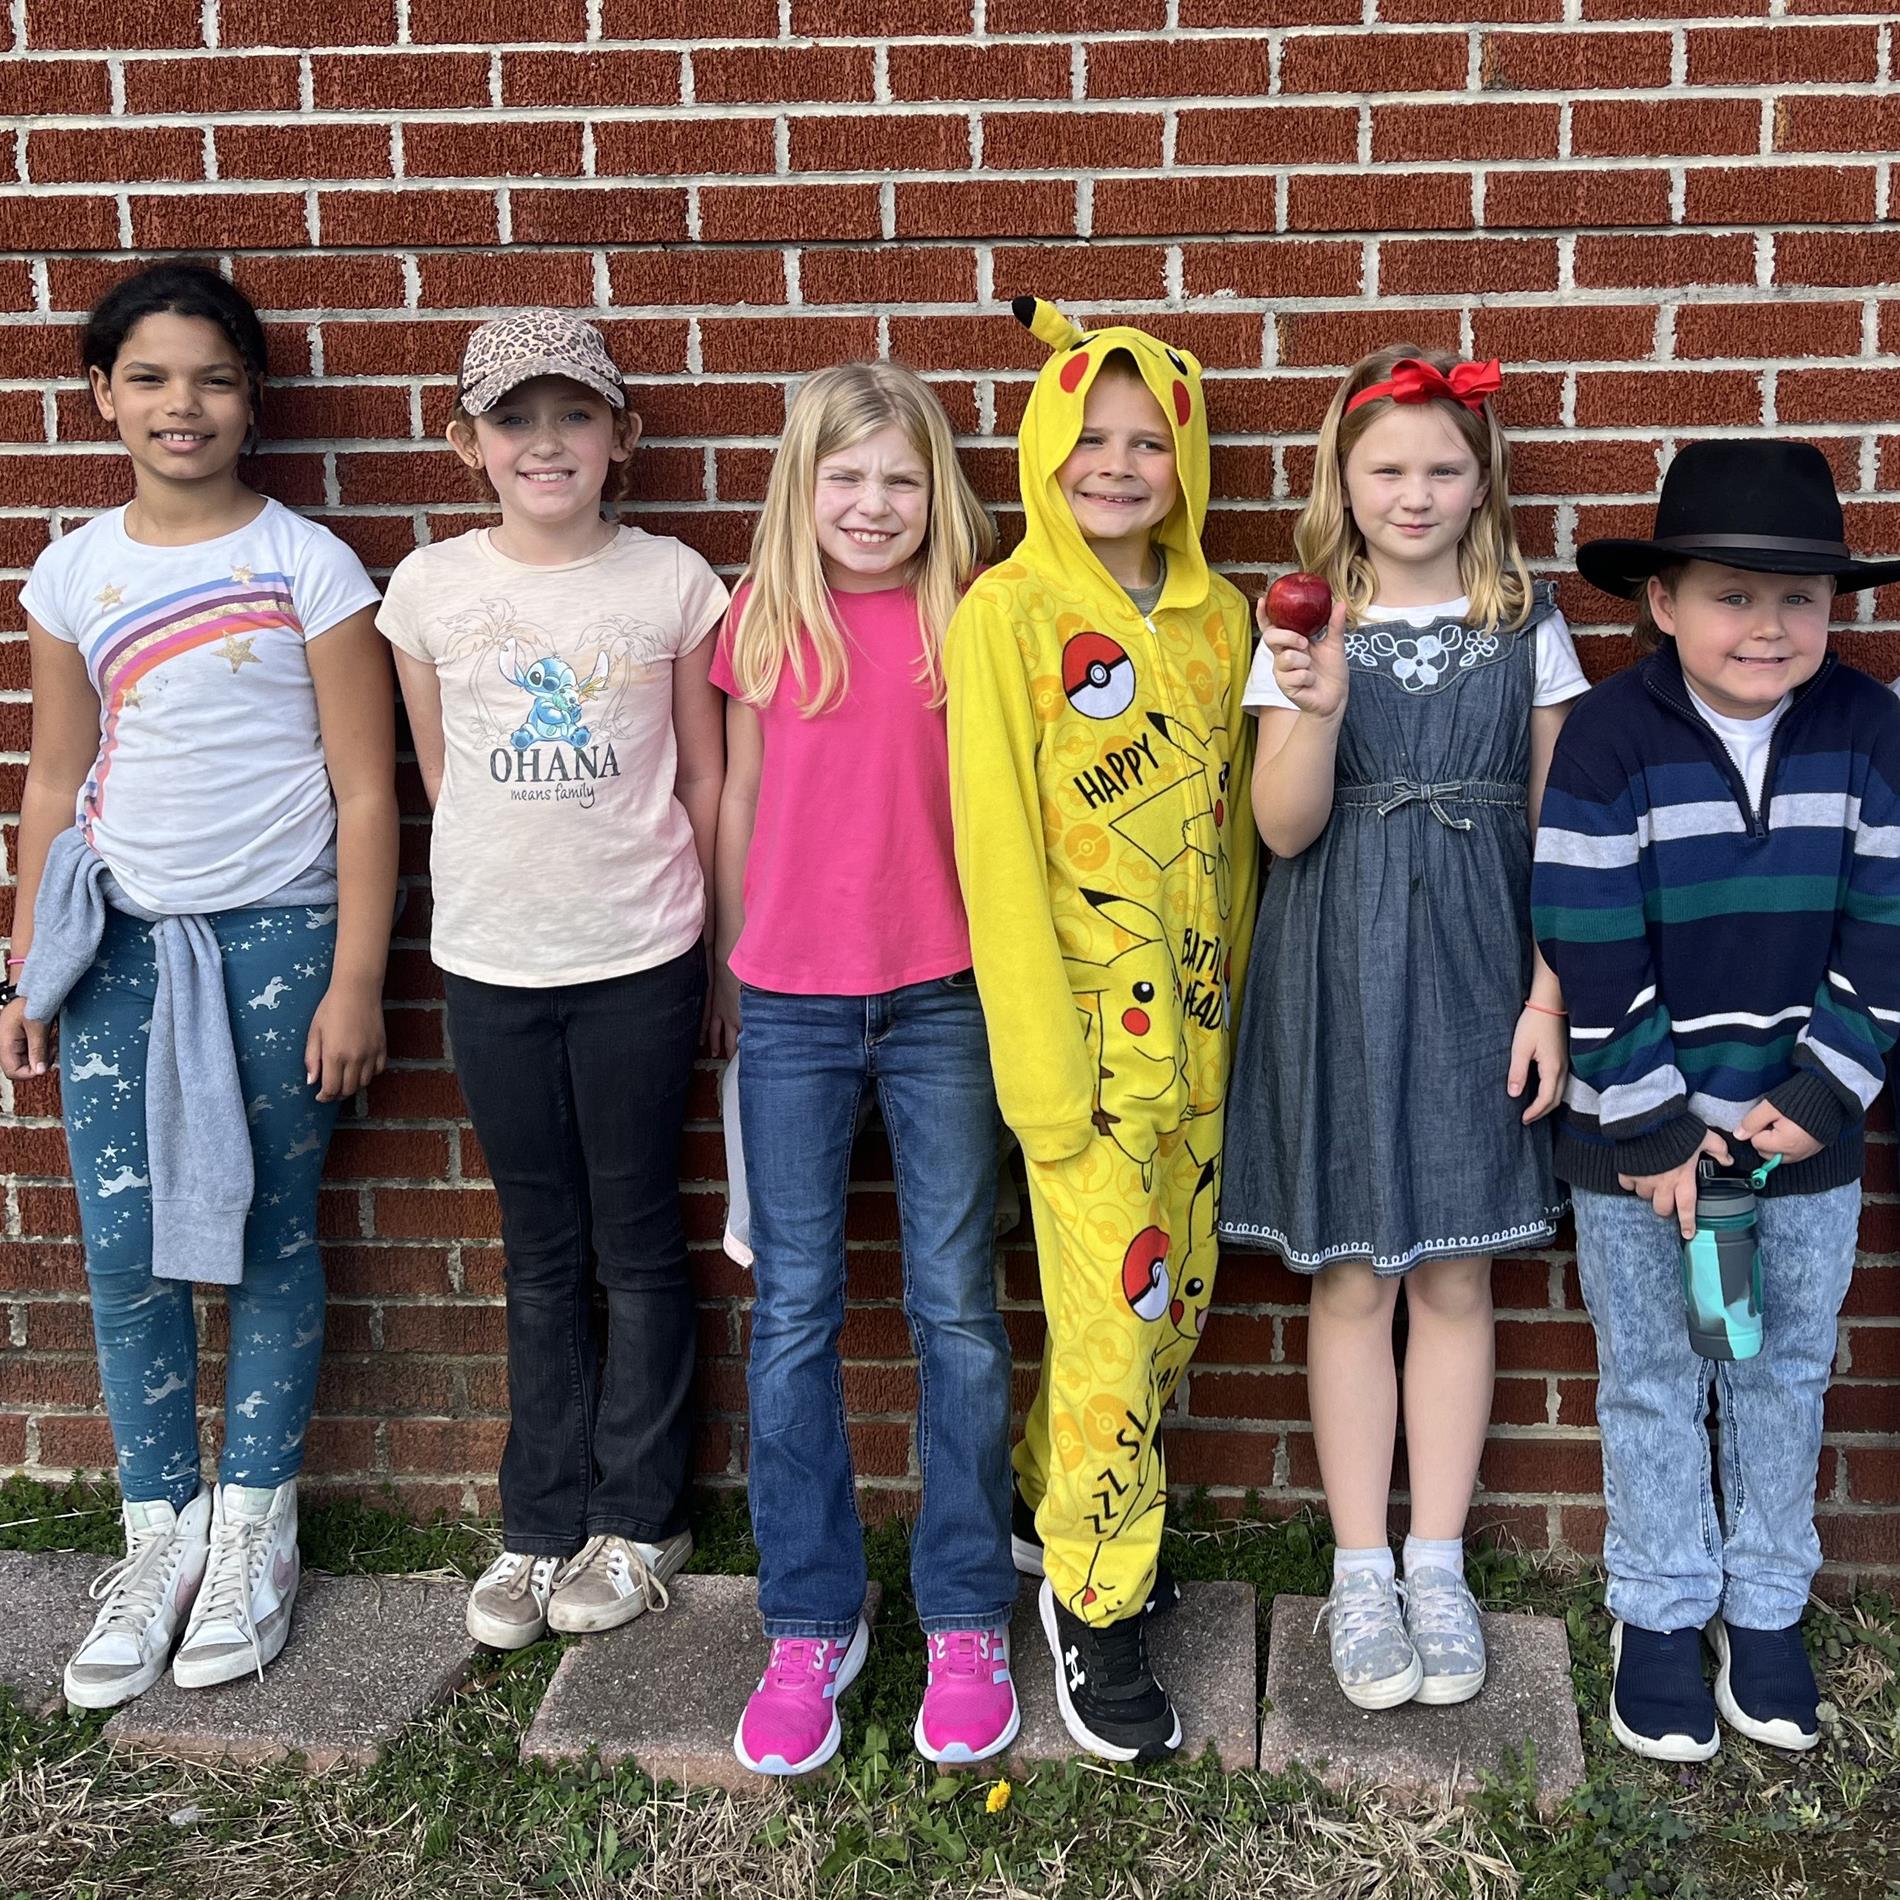 3rd grade character dress up day